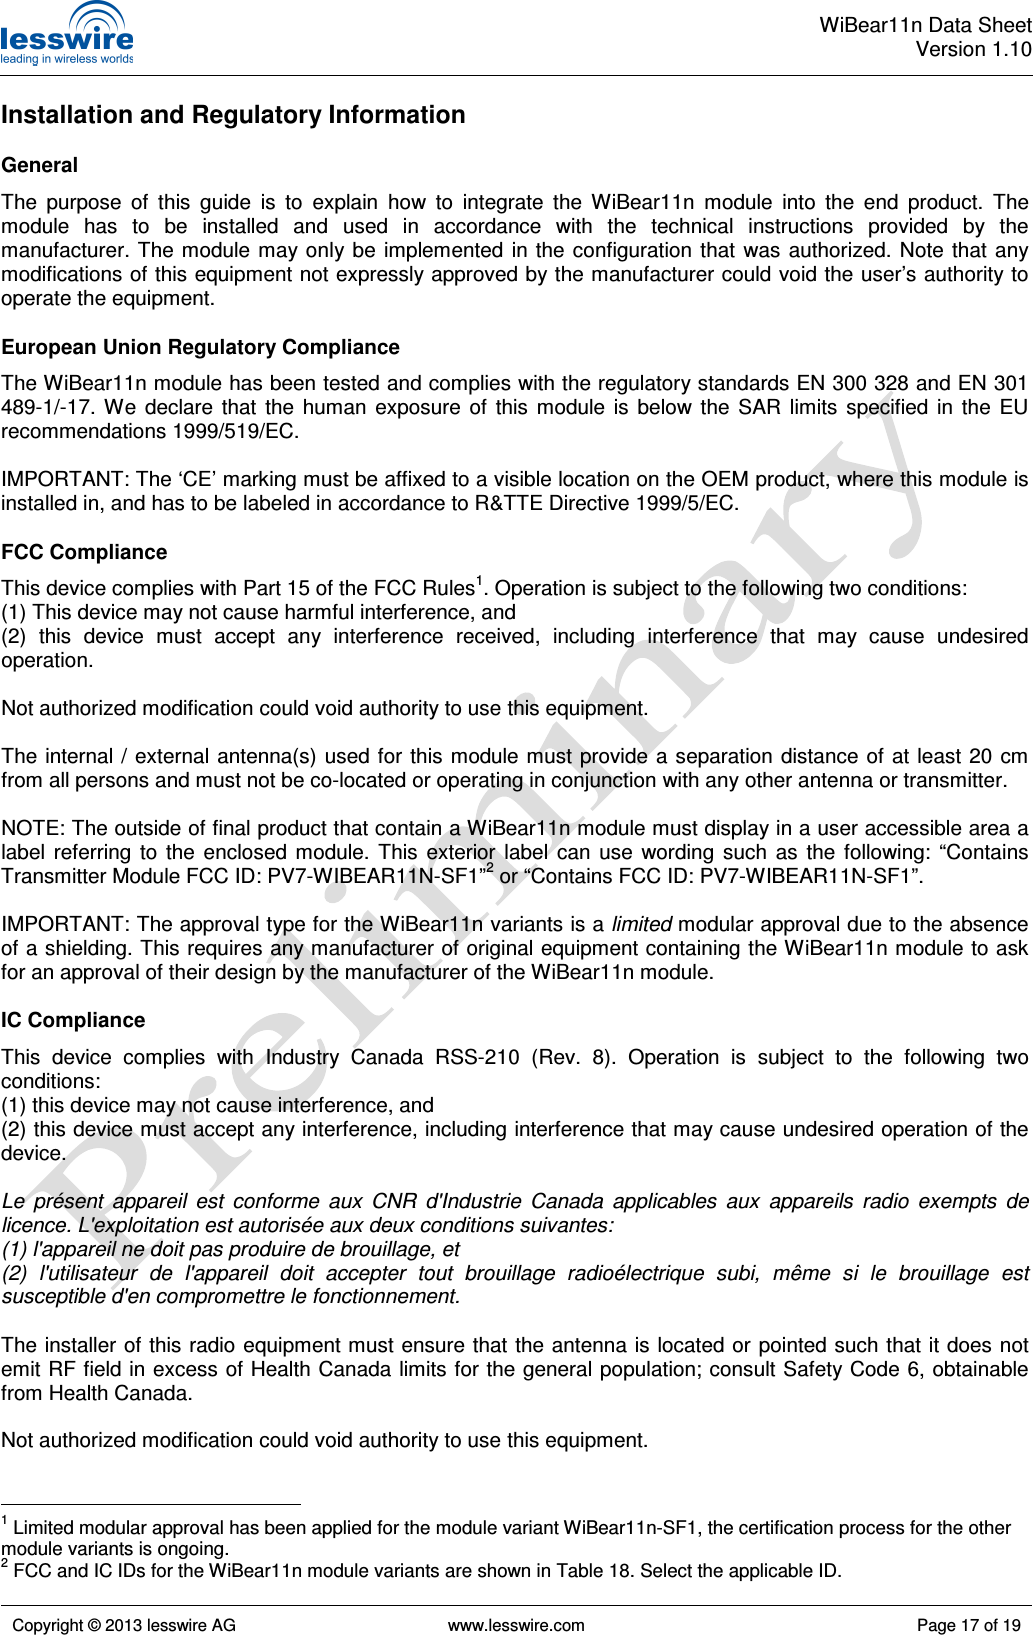  WiBear11n Data SheetVersion 1.10   Copyright © 2013 lesswire AG   www.lesswire.com  Page 17 of 19  Installation and Regulatory Information General The  purpose  of  this  guide  is  to  explain  how  to  integrate  the  WiBear11n  module  into  the  end  product.  The module  has  to  be  installed  and  used  in  accordance  with  the  technical  instructions  provided  by  the manufacturer. The module may  only be implemented  in the  configuration that  was  authorized.  Note that any modifications of this equipment not expressly approved by the manufacturer could void the user’s authority to operate the equipment. European Union Regulatory Compliance The WiBear11n module has been tested and complies with the regulatory standards EN 300 328 and EN 301 489-1/-17.  We  declare  that  the  human  exposure  of  this  module  is  below  the  SAR  limits  specified  in  the  EU recommendations 1999/519/EC.  IMPORTANT: The ‘CE’ marking must be affixed to a visible location on the OEM product, where this module is installed in, and has to be labeled in accordance to R&amp;TTE Directive 1999/5/EC. FCC Compliance This device complies with Part 15 of the FCC Rules1. Operation is subject to the following two conditions: (1) This device may not cause harmful interference, and (2)  this  device  must  accept  any  interference  received,  including  interference  that  may  cause  undesired operation.  Not authorized modification could void authority to use this equipment.  The  internal  / external antenna(s) used  for this  module must  provide a separation distance of at  least 20  cm from all persons and must not be co-located or operating in conjunction with any other antenna or transmitter.  NOTE: The outside of final product that contain a WiBear11n module must display in a user accessible area a label  referring  to  the  enclosed  module.  This  exterior  label  can  use  wording  such  as  the  following:  “Contains Transmitter Module FCC ID: PV7-WIBEAR11N-SF1”2 or “Contains FCC ID: PV7-WIBEAR11N-SF1”.  IMPORTANT: The approval type for the WiBear11n variants is a limited modular approval due to the absence of a shielding. This requires any manufacturer of original equipment containing the WiBear11n module to ask for an approval of their design by the manufacturer of the WiBear11n module. IC Compliance This  device  complies  with  Industry  Canada  RSS-210  (Rev.  8).  Operation  is  subject  to  the  following  two conditions: (1) this device may not cause interference, and (2) this device must accept any interference, including interference that may cause undesired operation of the device.  Le  présent  appareil  est  conforme  aux  CNR  d&apos;Industrie  Canada  applicables  aux  appareils  radio  exempts  de licence. L&apos;exploitation est autorisée aux deux conditions suivantes: (1) l&apos;appareil ne doit pas produire de brouillage, et (2)  l&apos;utilisateur  de  l&apos;appareil  doit  accepter  tout  brouillage  radioélectrique  subi,  même  si  le  brouillage  est susceptible d&apos;en compromettre le fonctionnement.  The installer of this radio equipment must ensure that the antenna is located or  pointed such that it does not emit RF field in excess of Health Canada limits for the general population; consult Safety Code 6, obtainable from Health Canada.  Not authorized modification could void authority to use this equipment.                                                   1 Limited modular approval has been applied for the module variant WiBear11n-SF1, the certification process for the other module variants is ongoing. 2 FCC and IC IDs for the WiBear11n module variants are shown in Table 18. Select the applicable ID. 